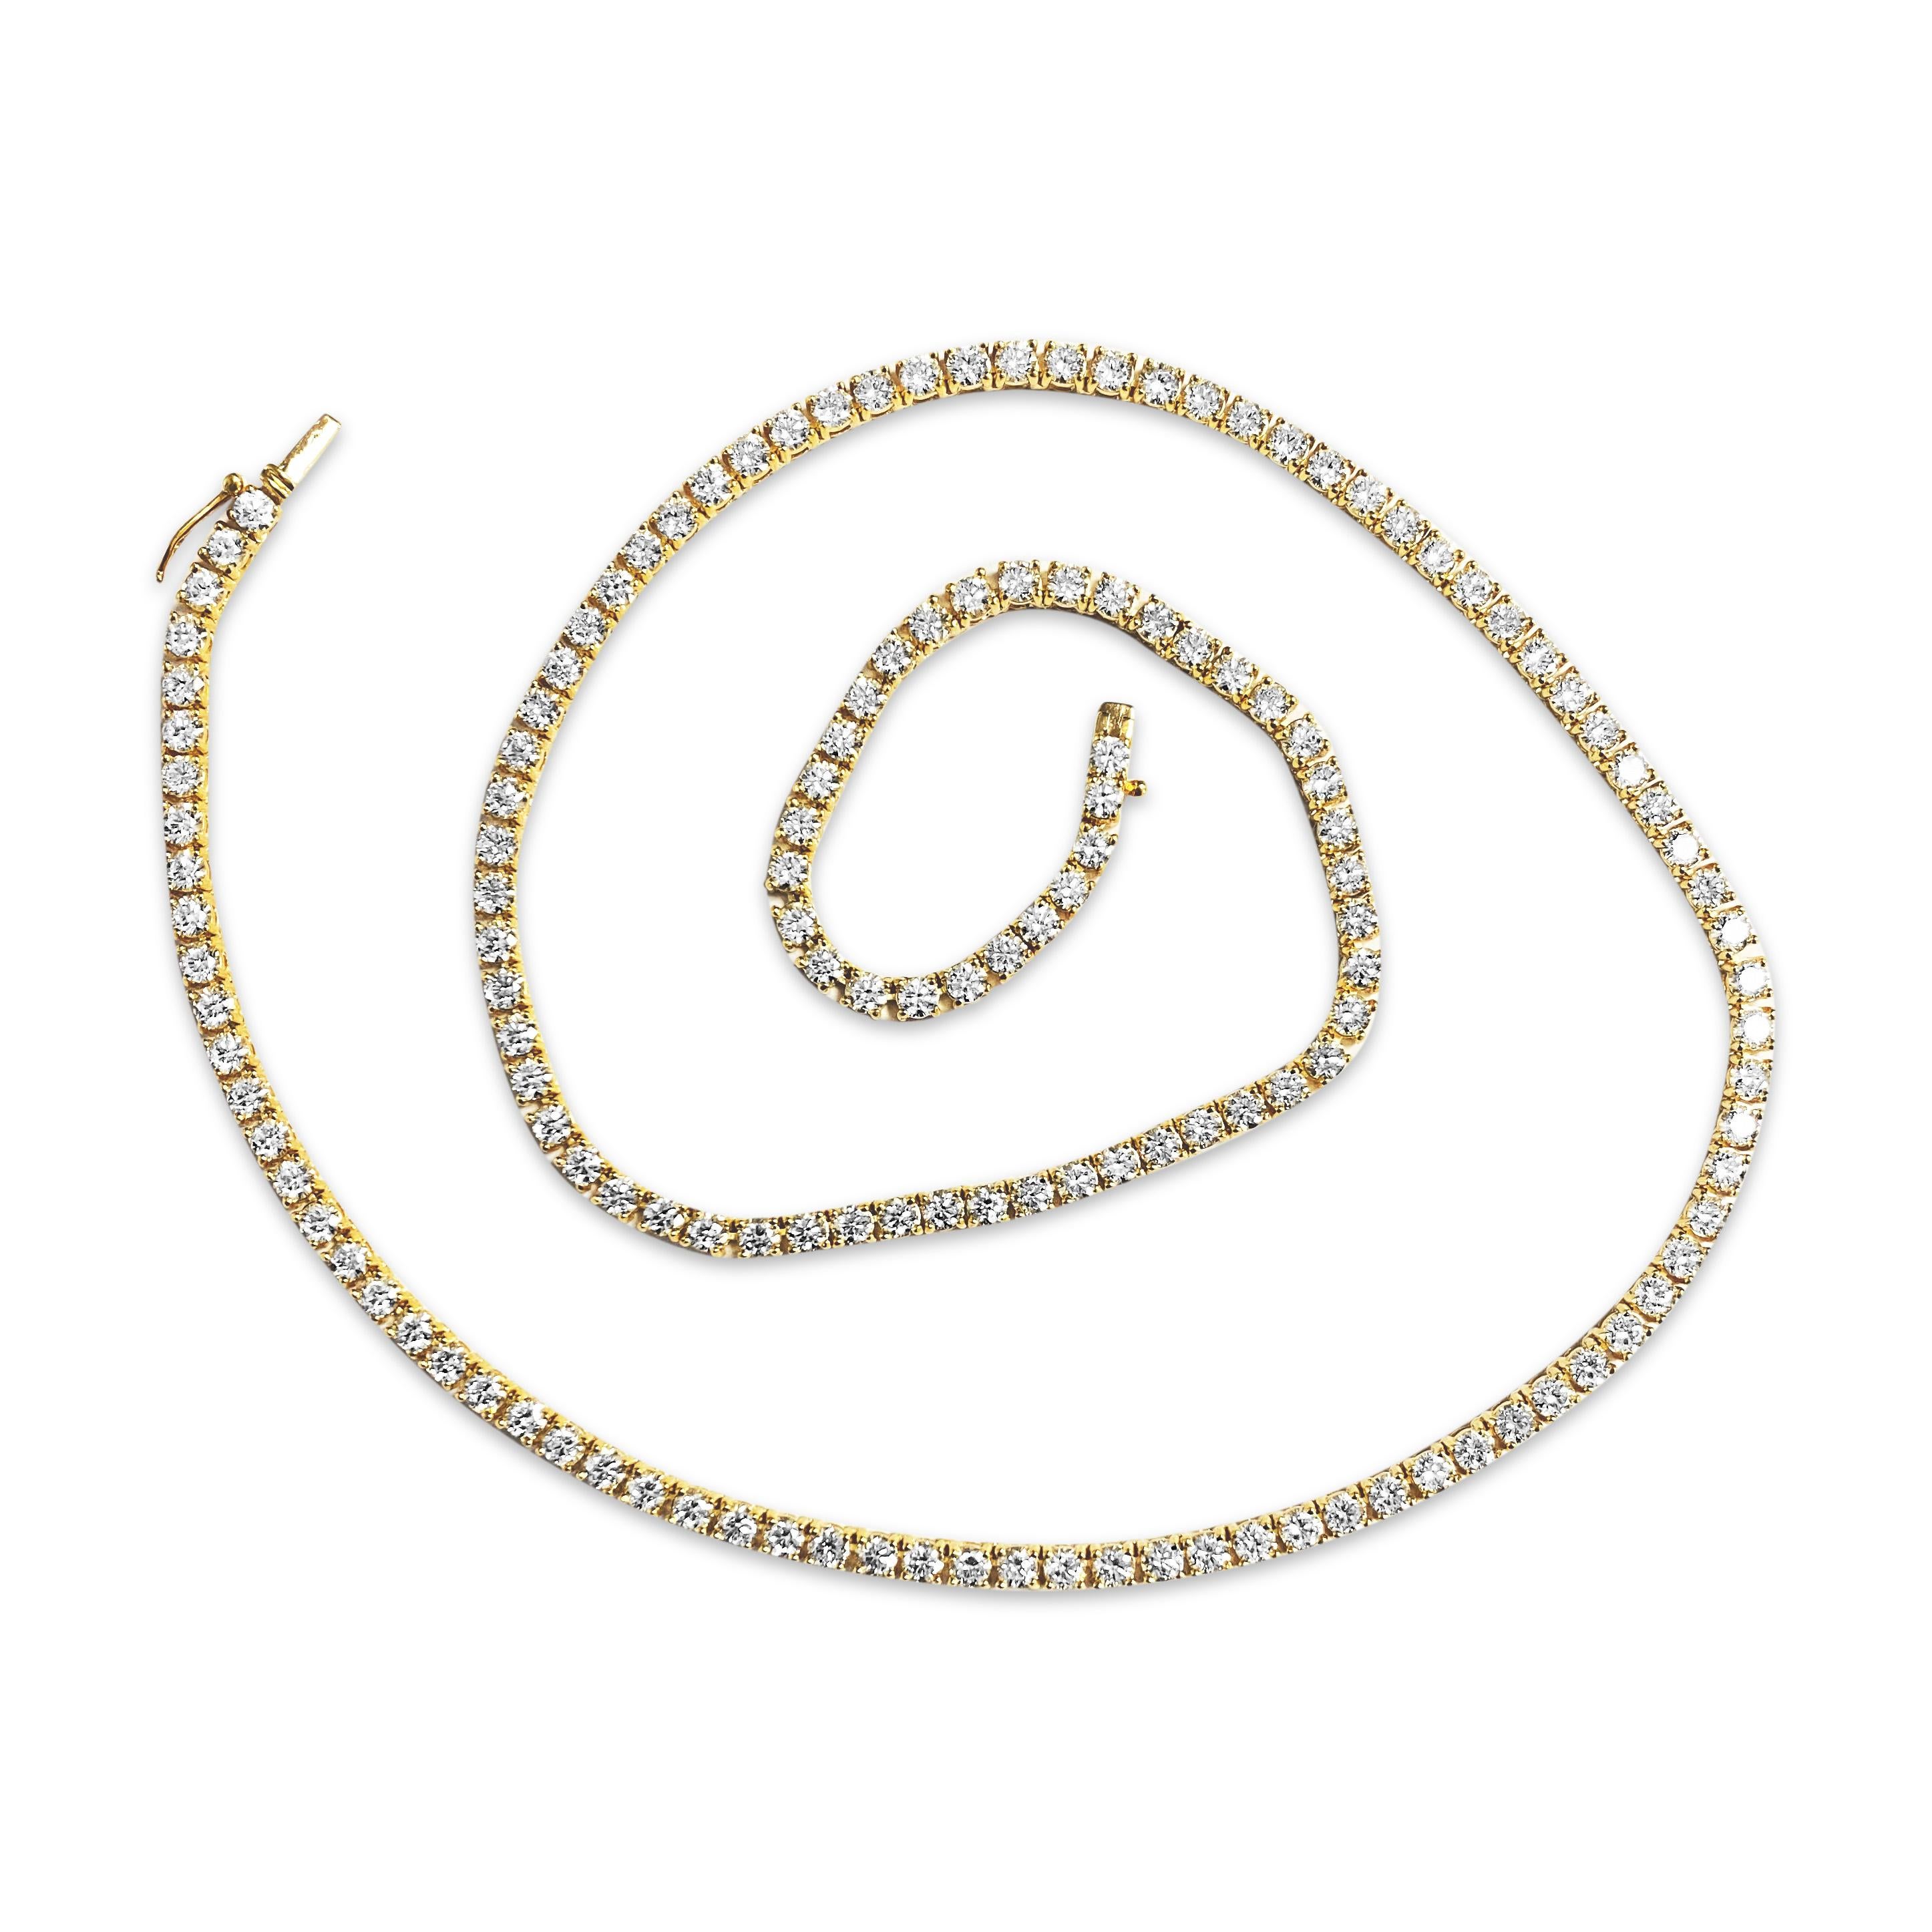 15.00 Carat VVS Diamond Tennis Necklace in 14 Karat Yellow Gold In New Condition For Sale In Miami, FL